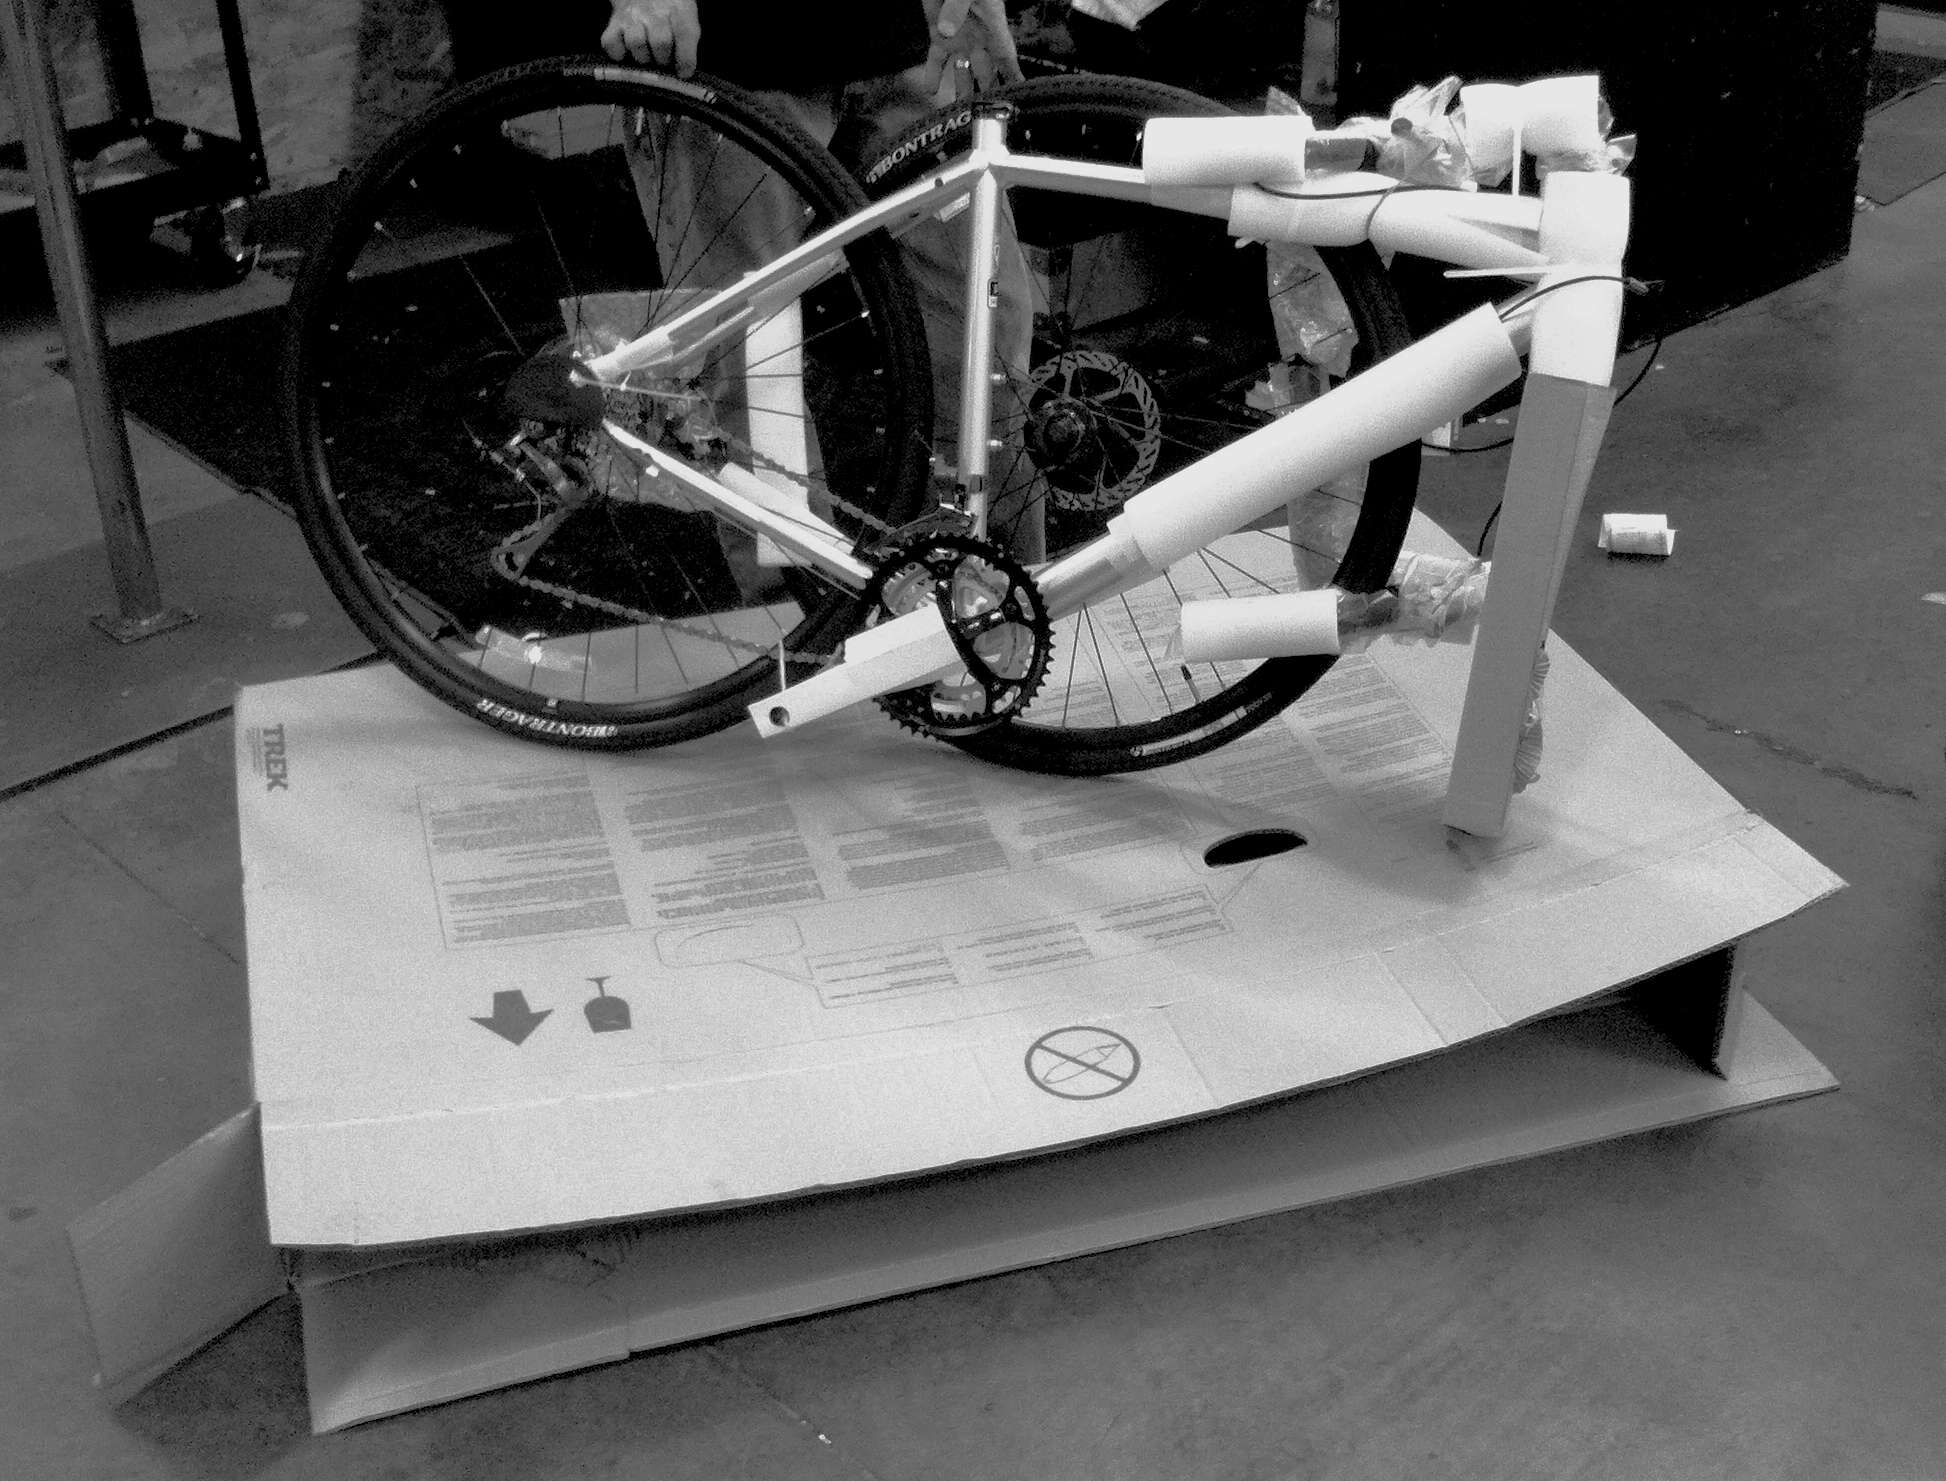 Image of a bike being packed into a bike box